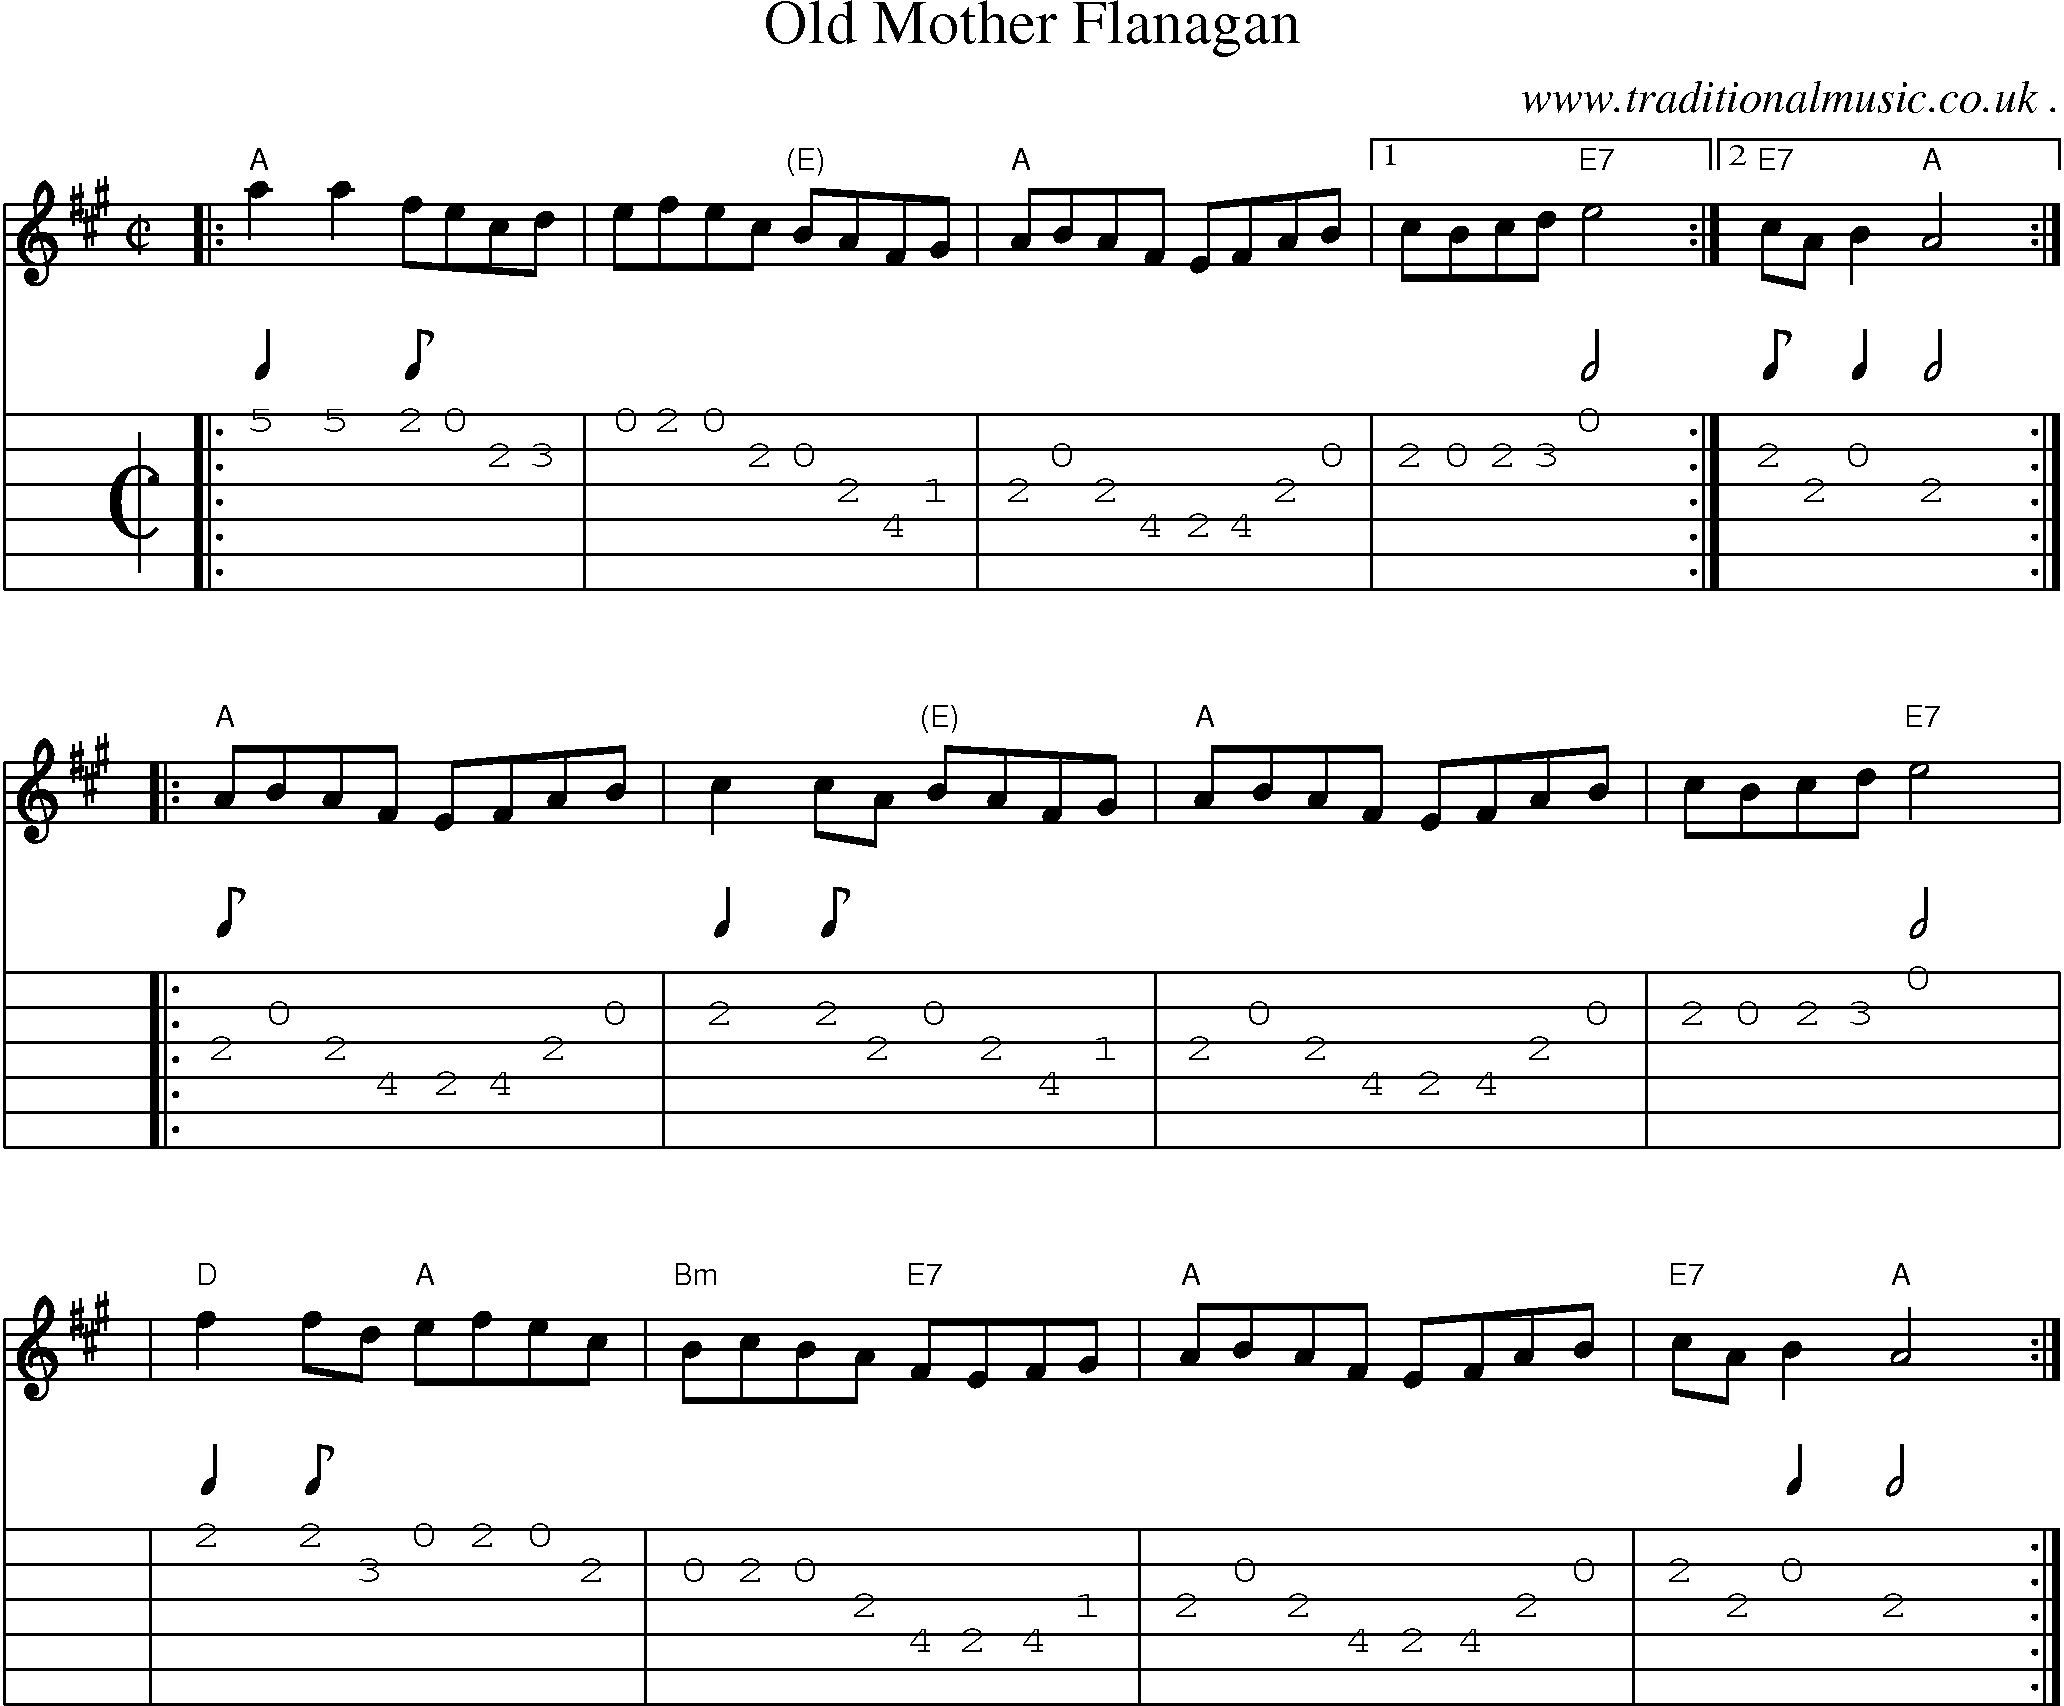 Music Score and Guitar Tabs for Old Mother Flanagan